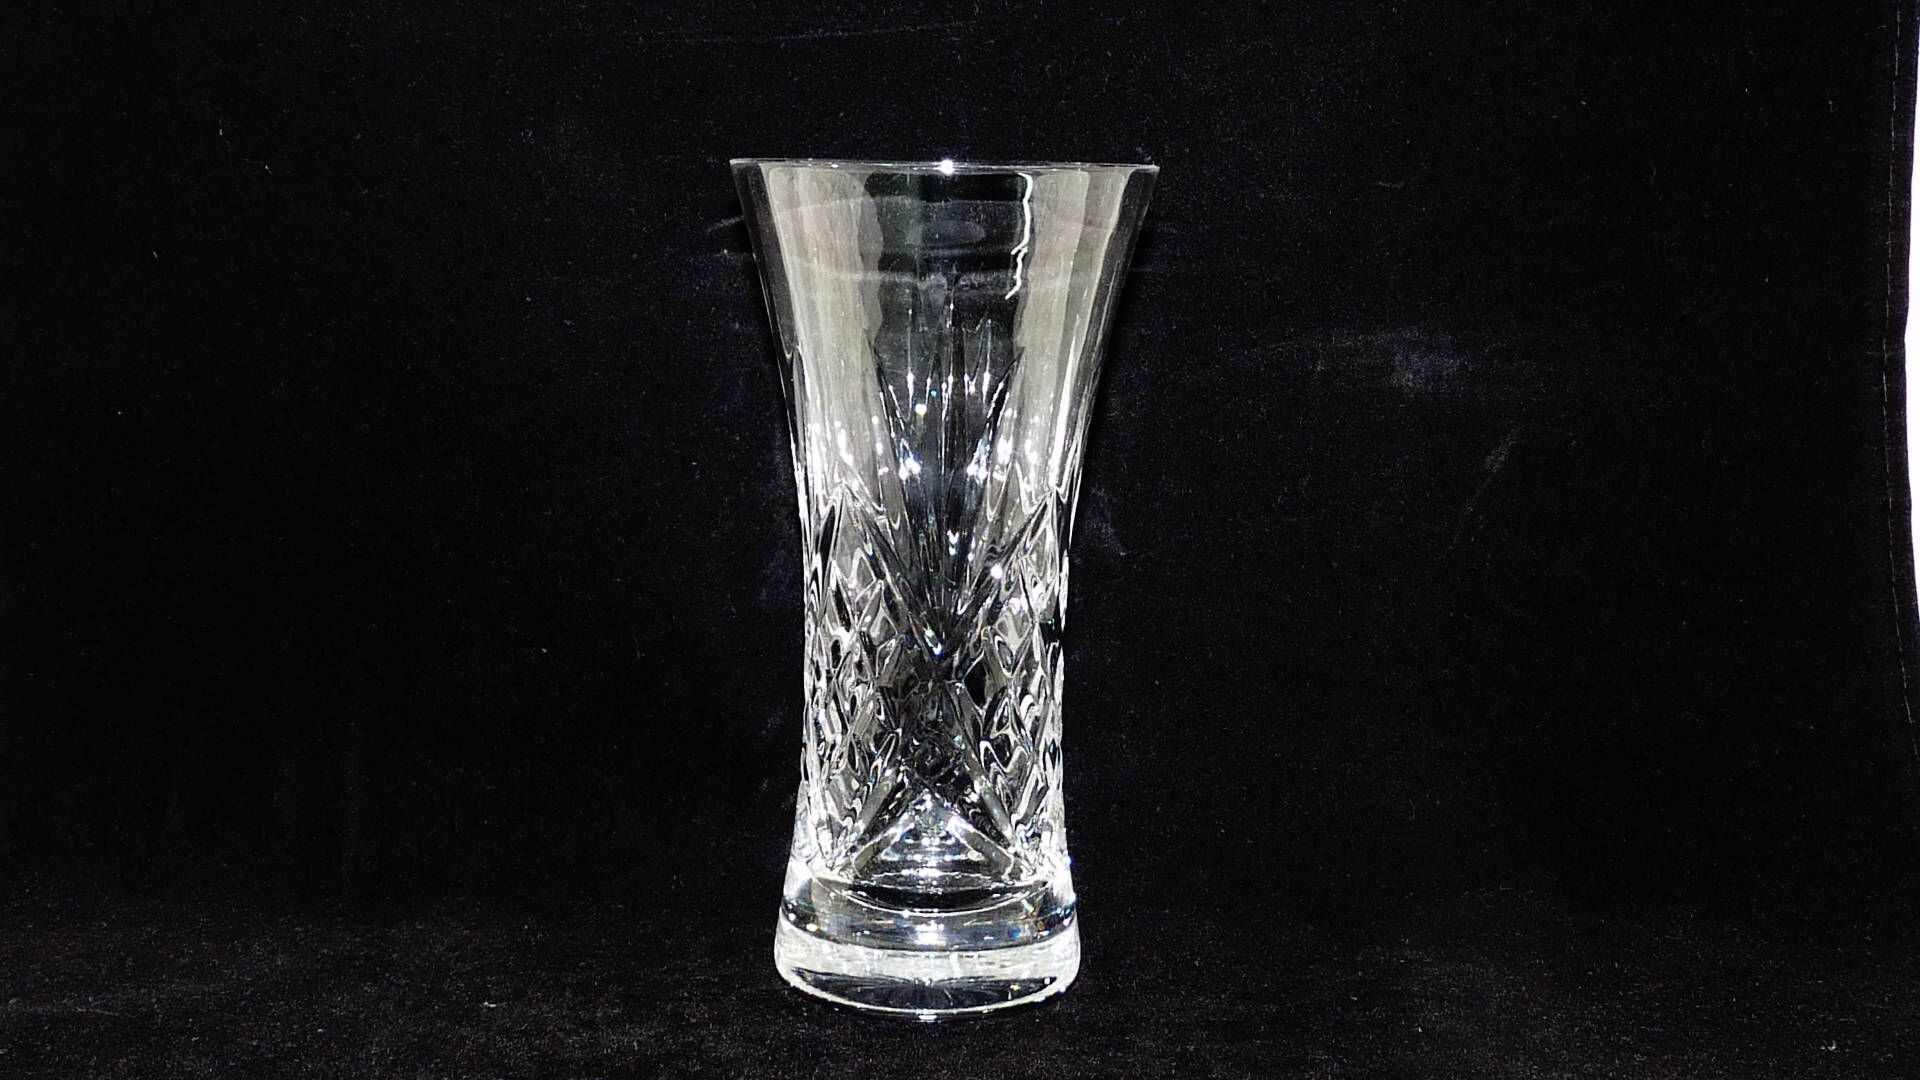 15 Best Glass Cross Vase 2024 free download glass cross vase of excited to share the latest addition to my etsy shop small glass with excited to share the latest addition to my etsy shop small glass vase